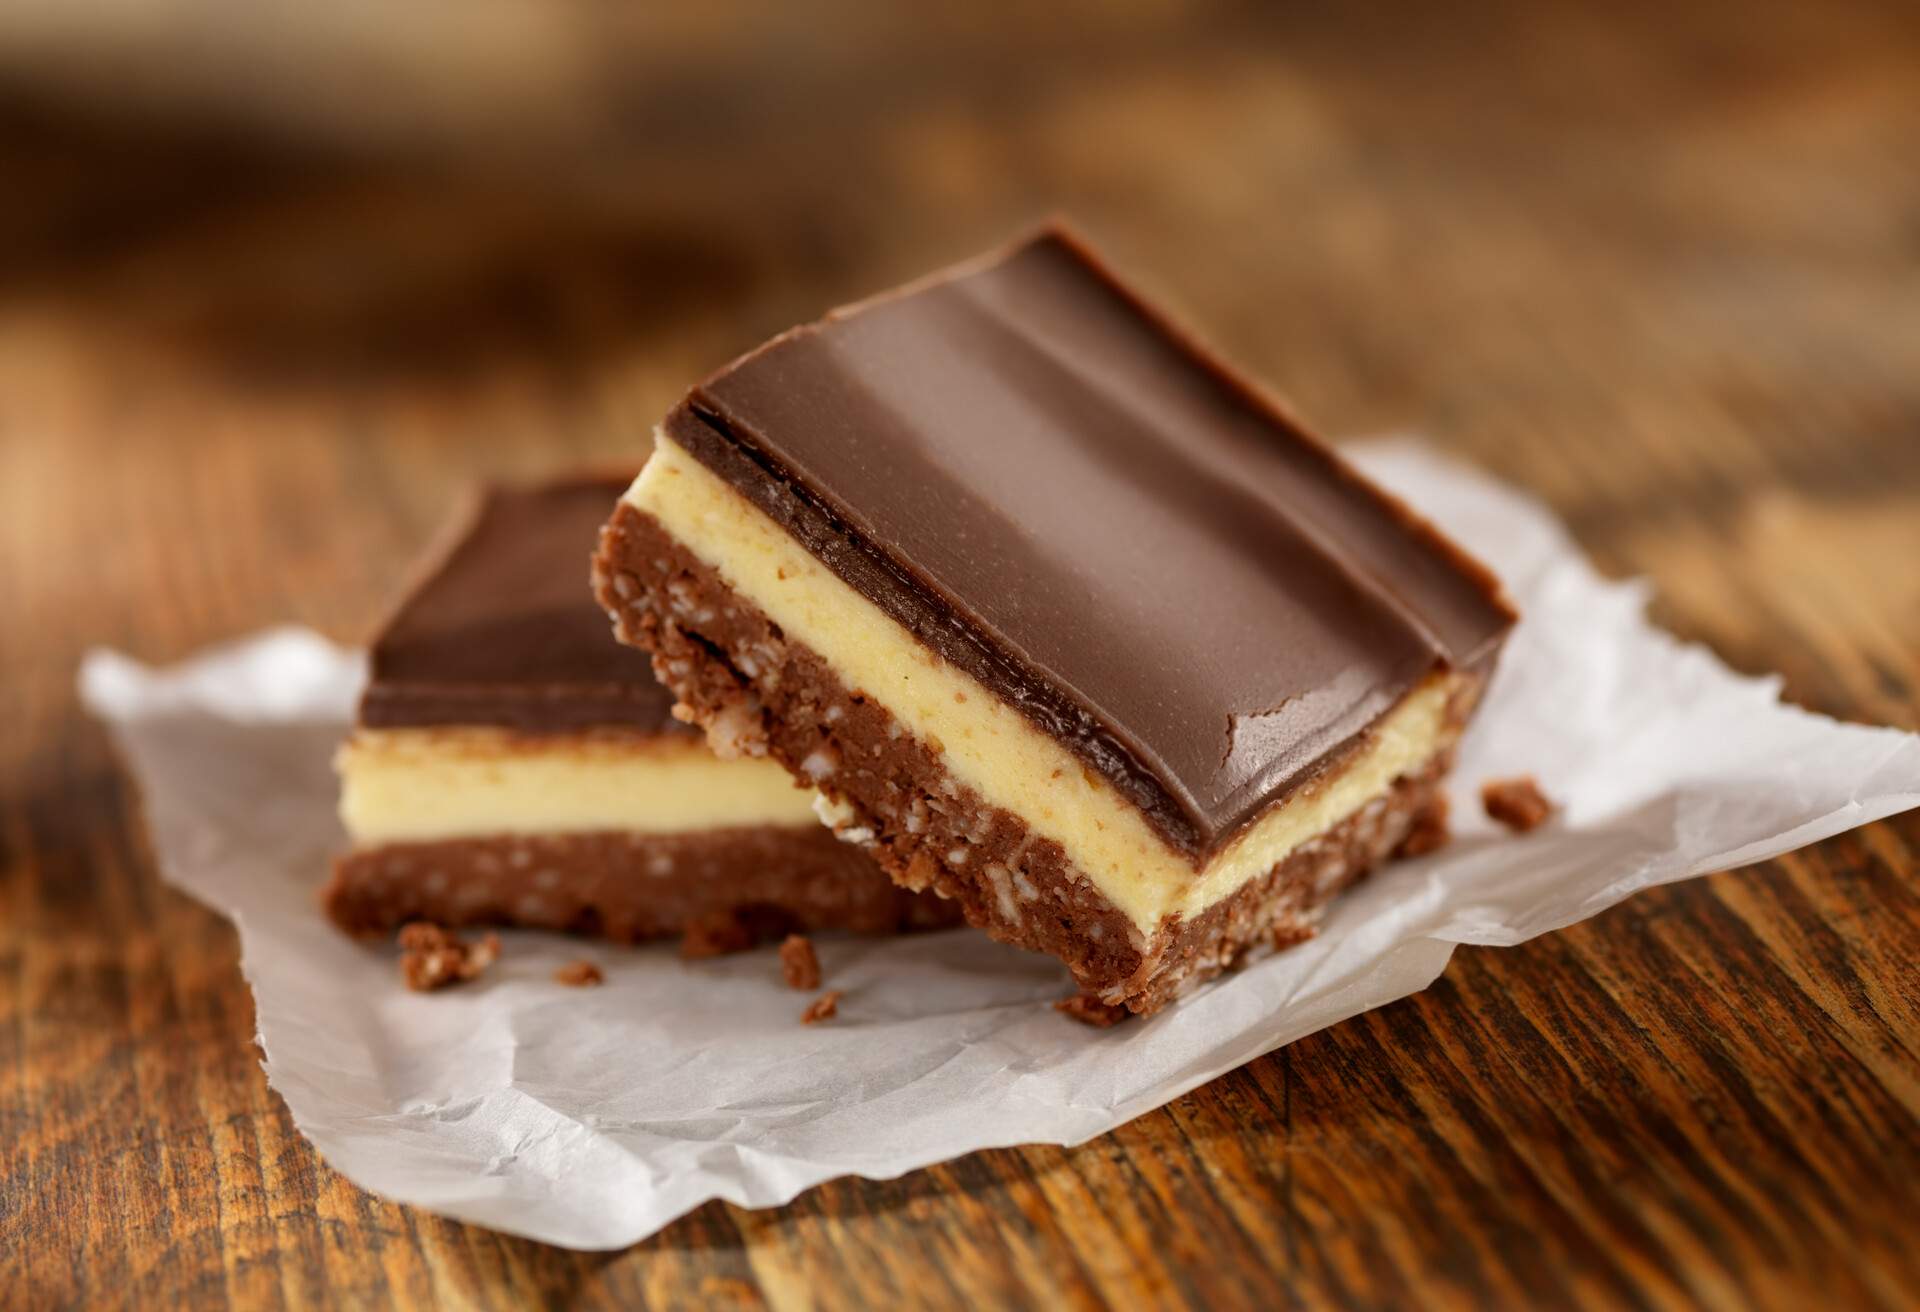 Nanaimo Bars have a crumb and coconut base layer, topped with vanilla custard flavoured butter icing and covered in chocolate -Photographed on Hasselblad H3D2-39mb Camera